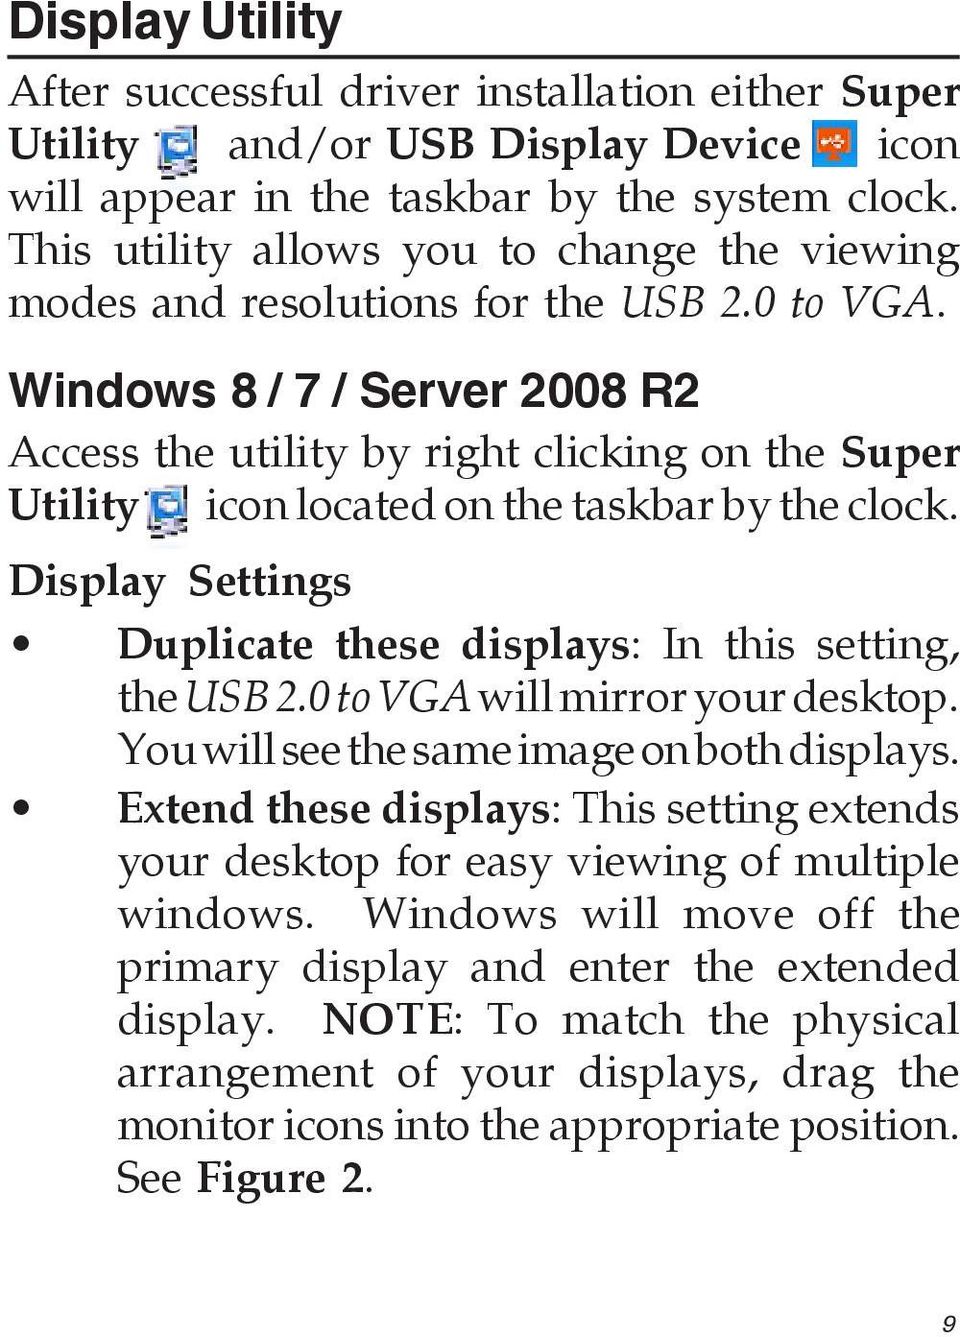 Windows 8 / 7 / Server 2008 R2 Access the utility by right clicking on the Super Utility icon located on the taskbar by the clock.